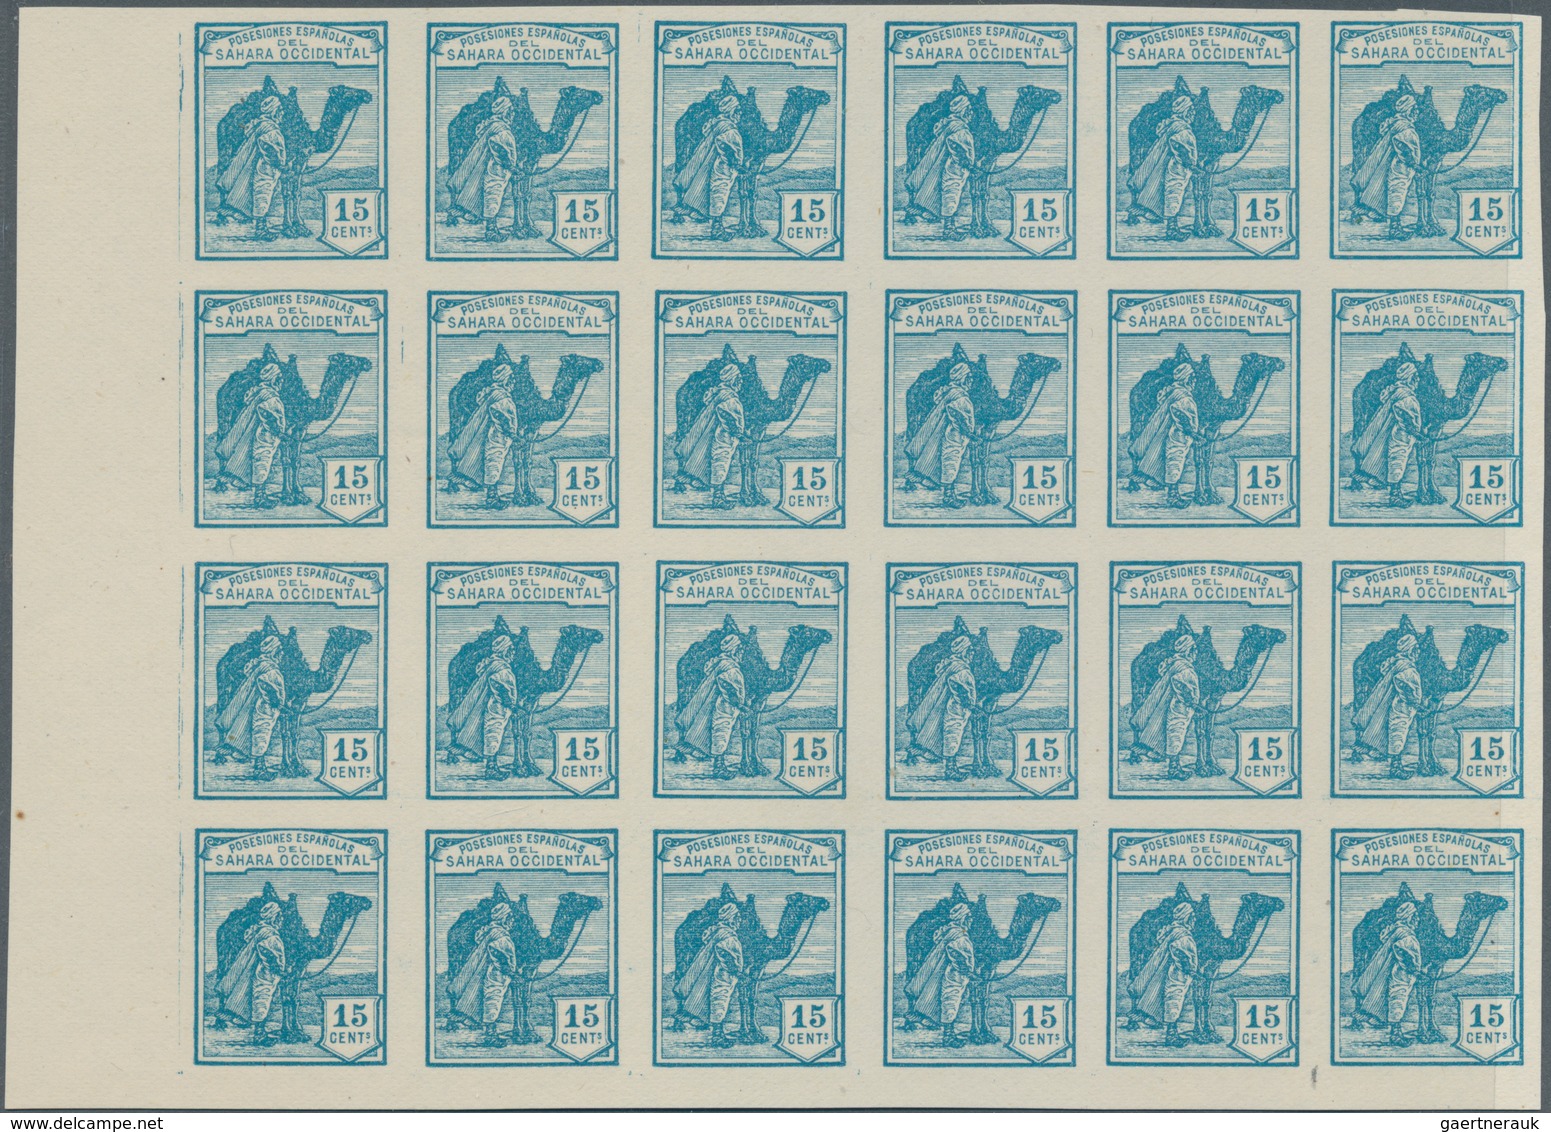 Spanisch-Sahara: 1936, Native with dromedary prepared reprint but NOT ISSUED set of ten without cont